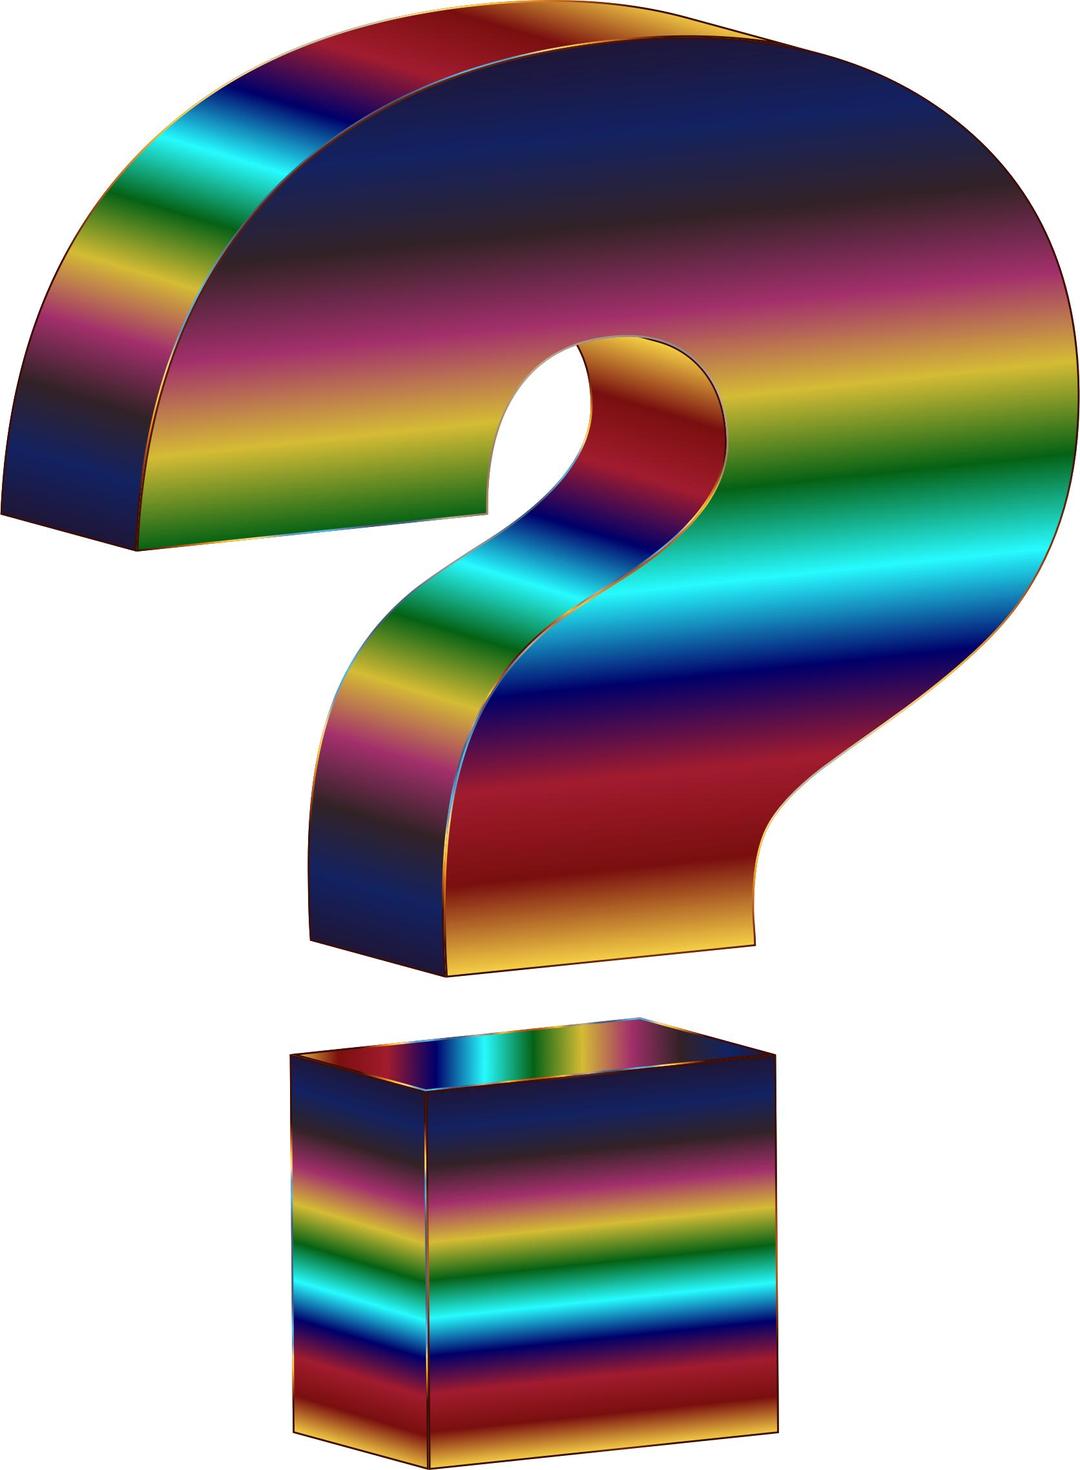 Psychedelic 3D Question Mark png transparent